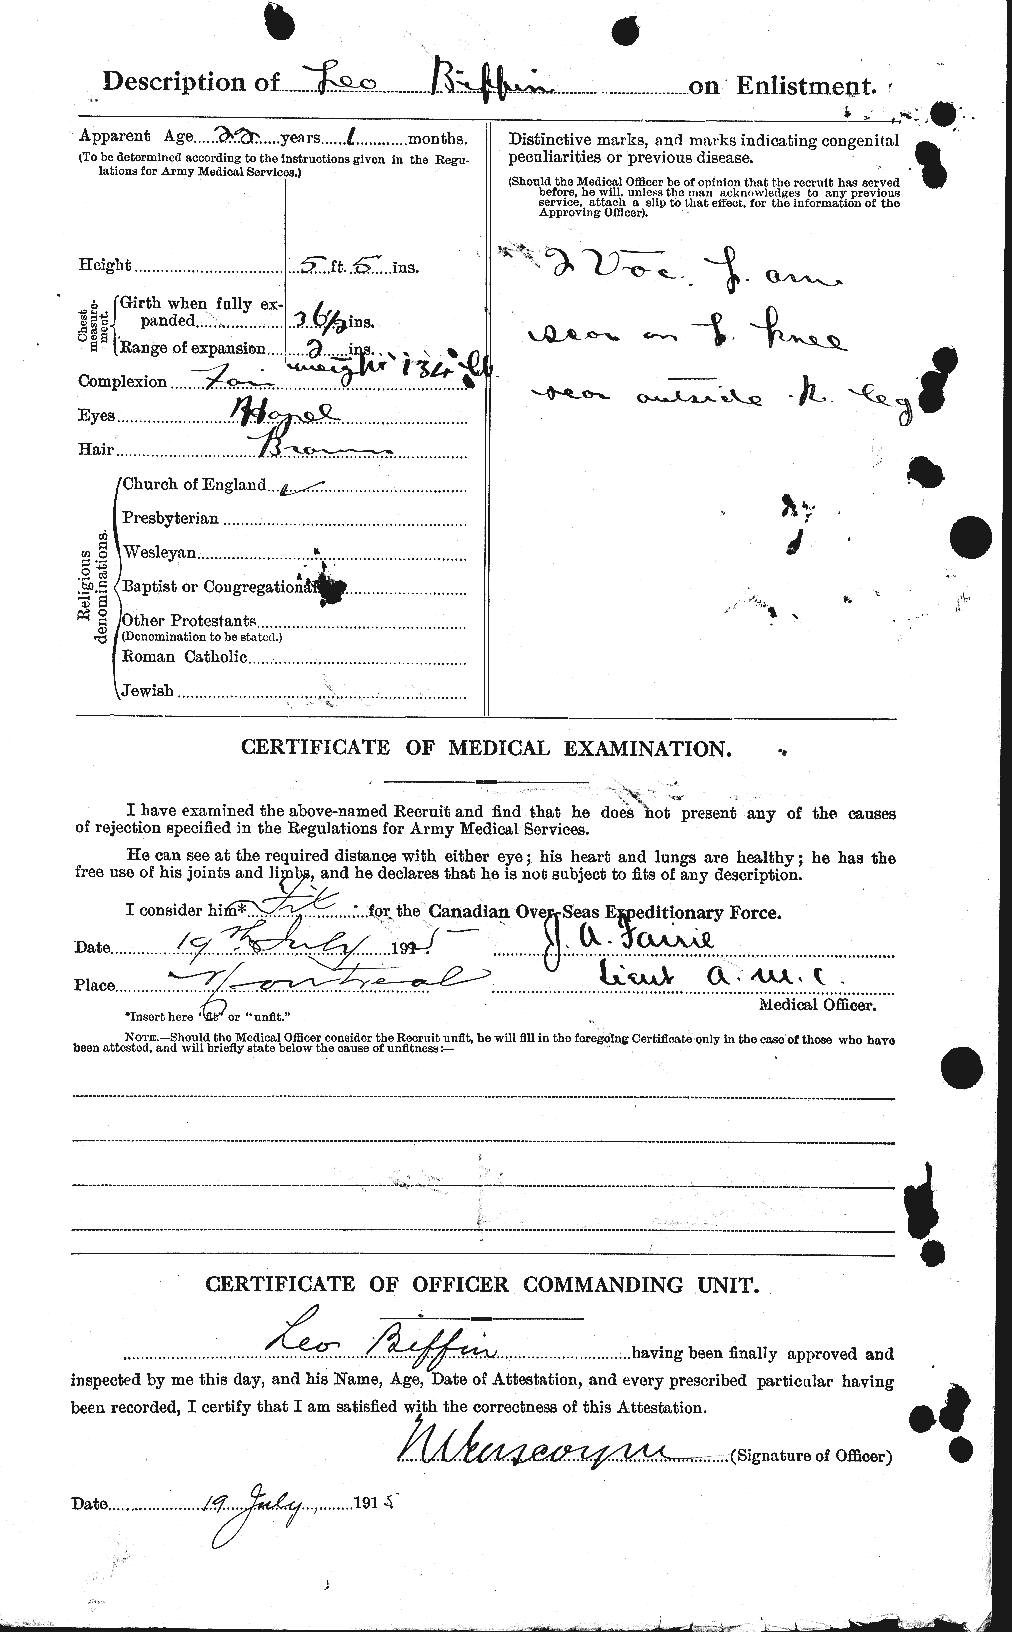 Personnel Records of the First World War - CEF 244694b